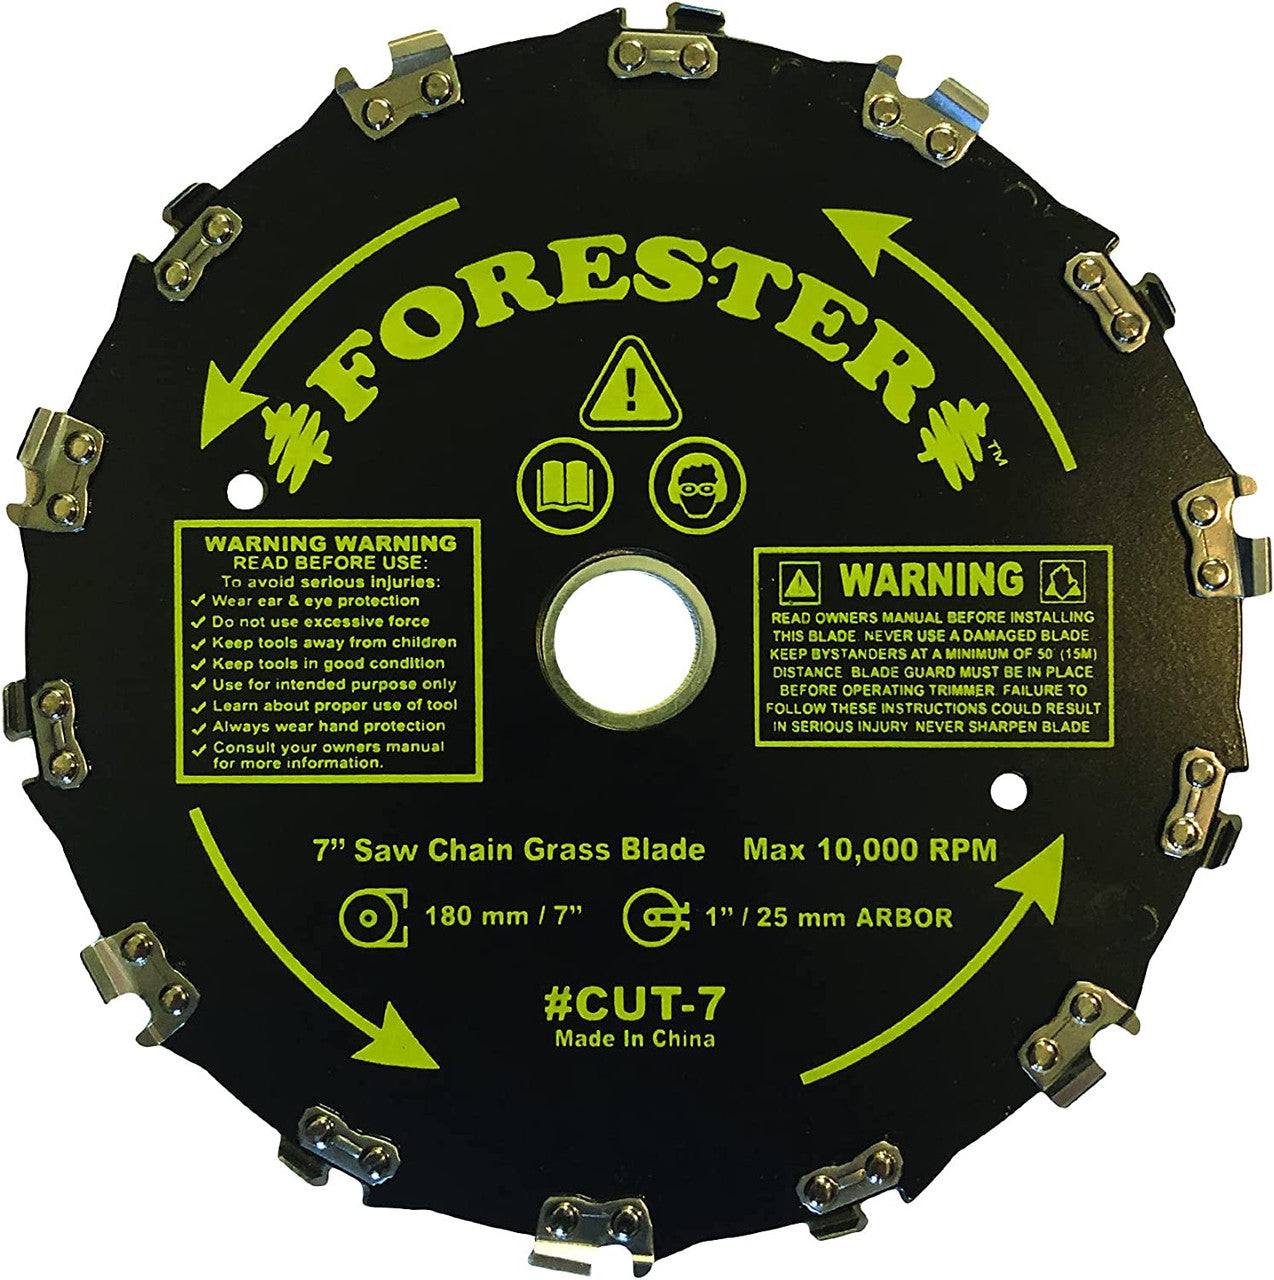 Forester Chainsaw Tooth Brush Cutter Blade